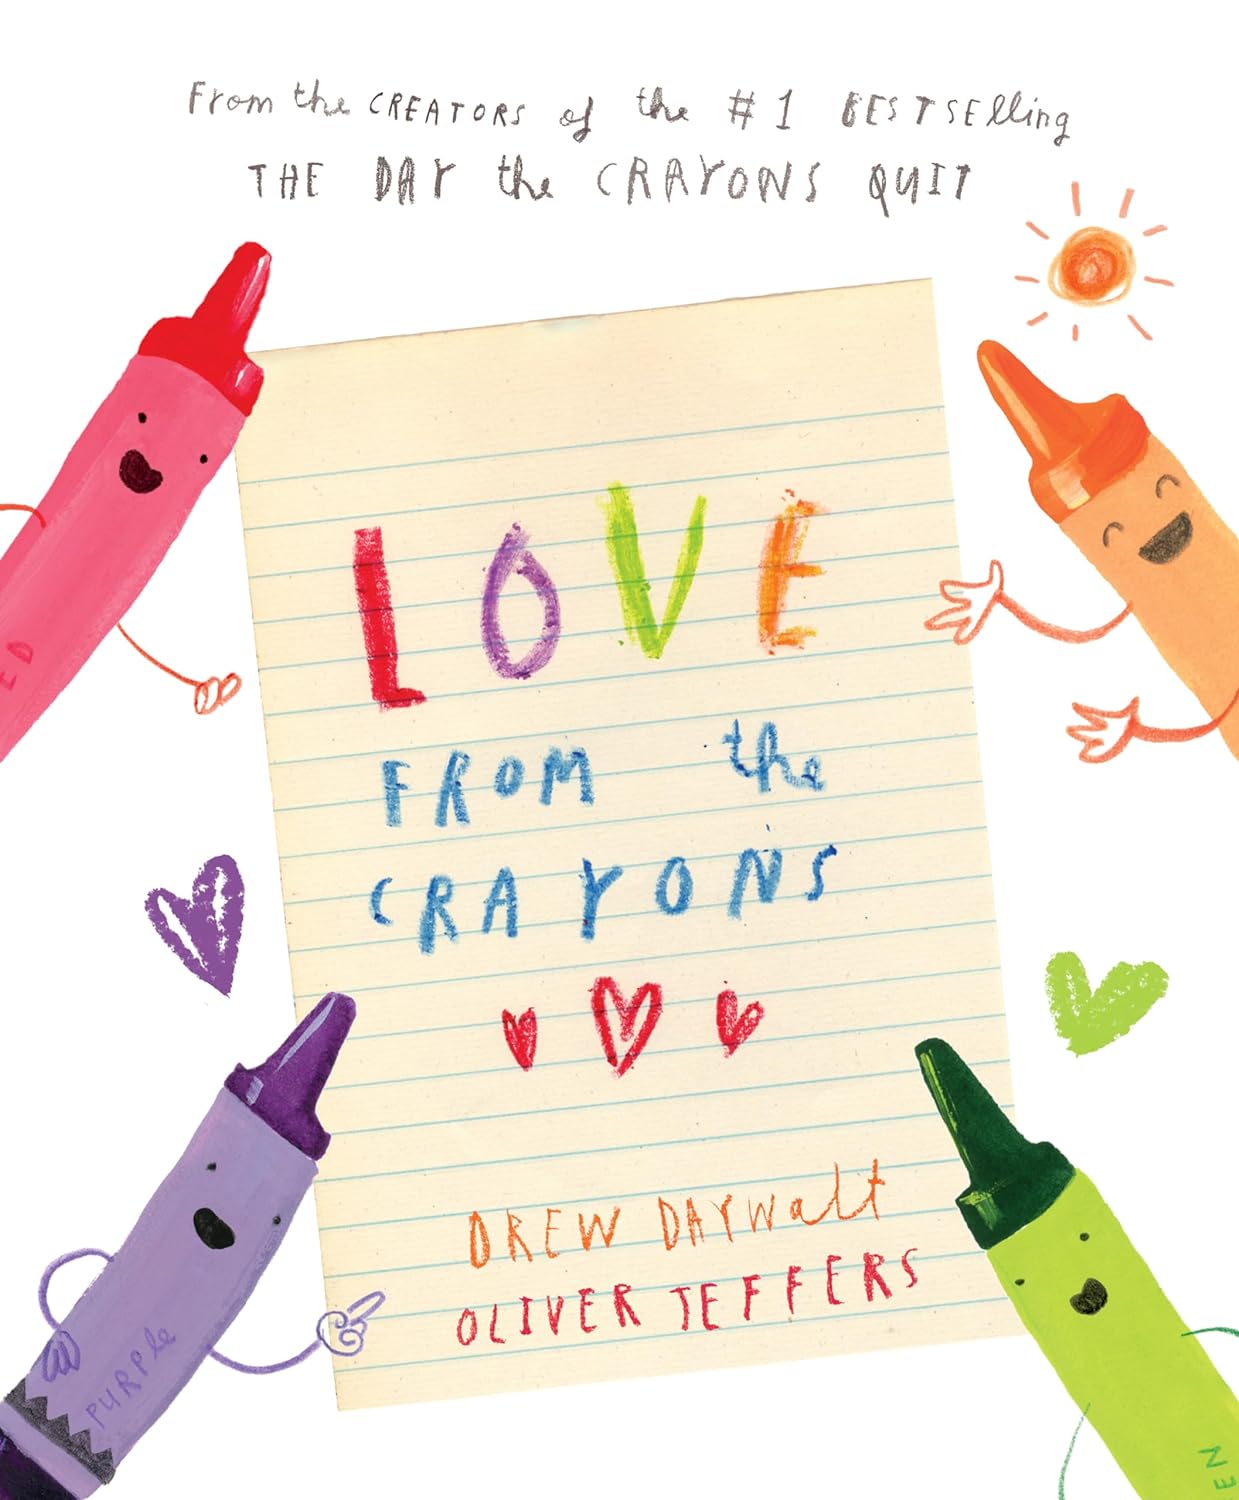 "Love from the Crayons" by Drew Daywalt